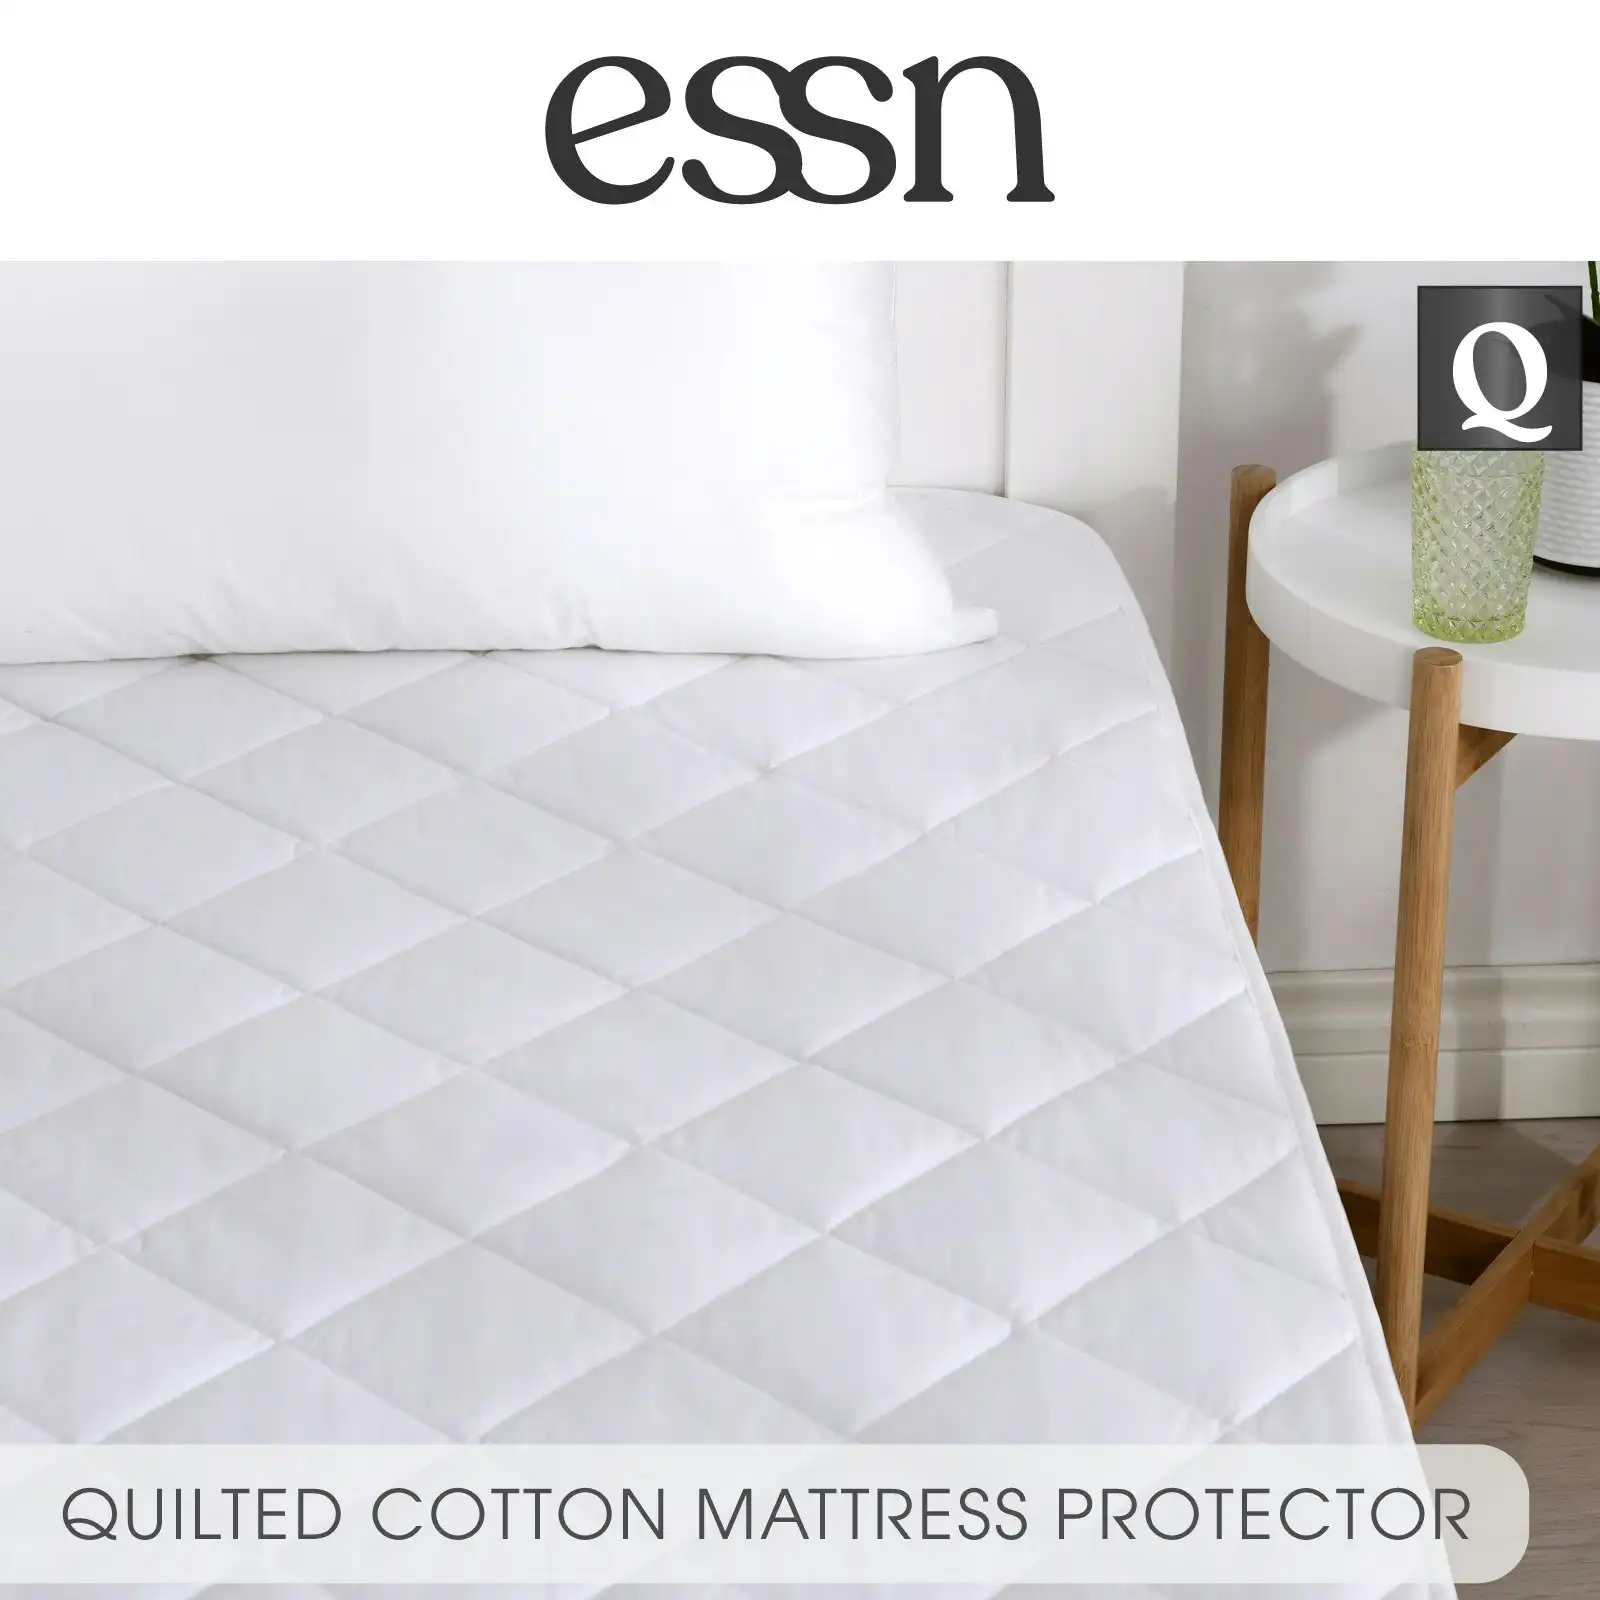 ESSN Commercial Corner Strap Quilted Cotton Mattress Protector White Queen Bed